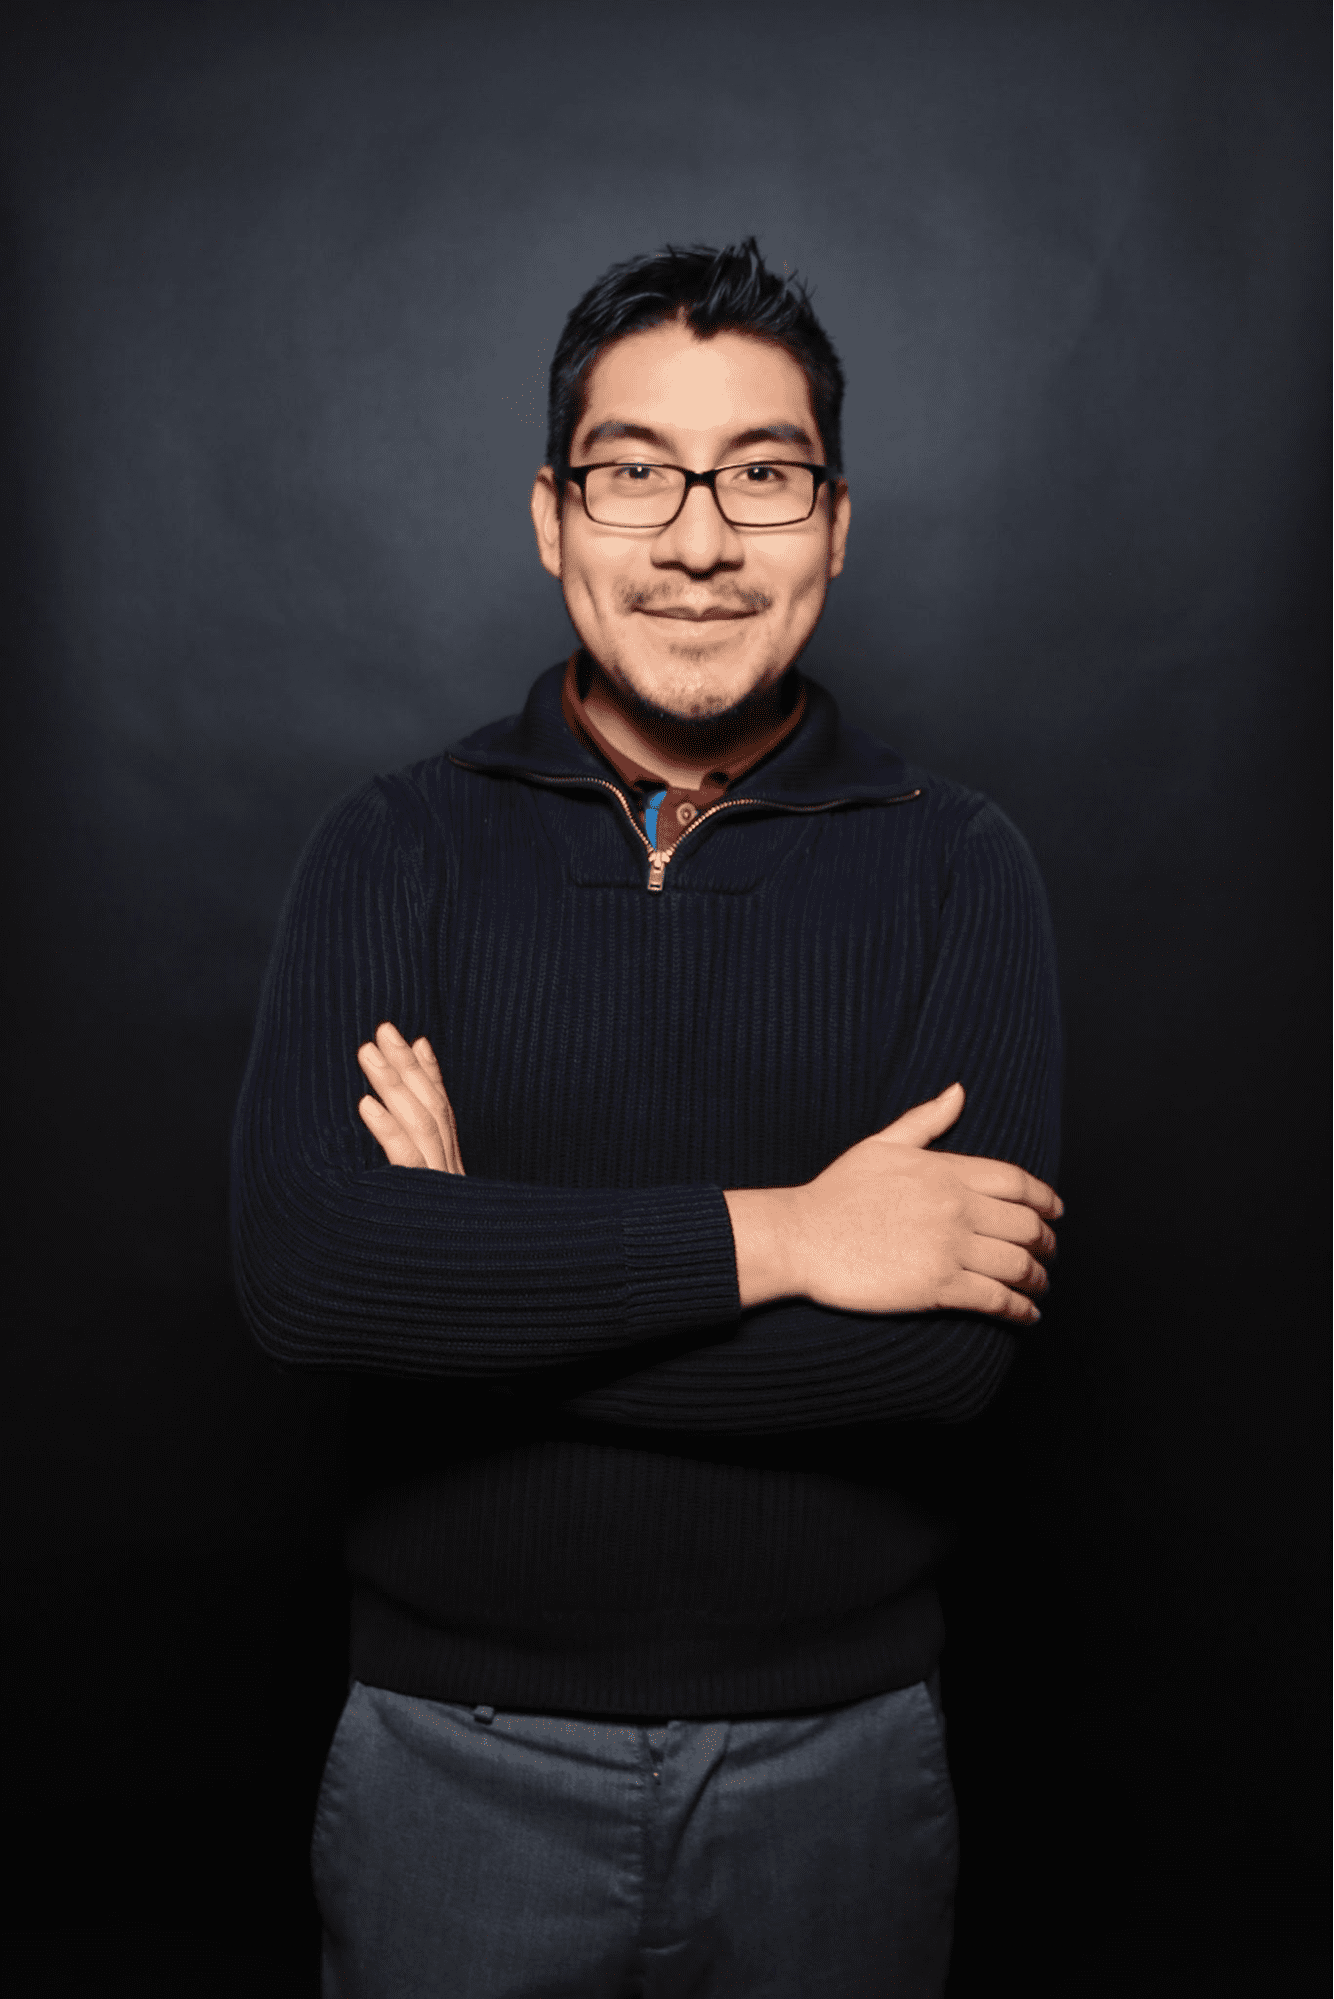 Professional photo of David Rios- Perez he has short dark hair and is wearing glasses. He has on a navy blue sweater with grey slacks. His arms are crossed.